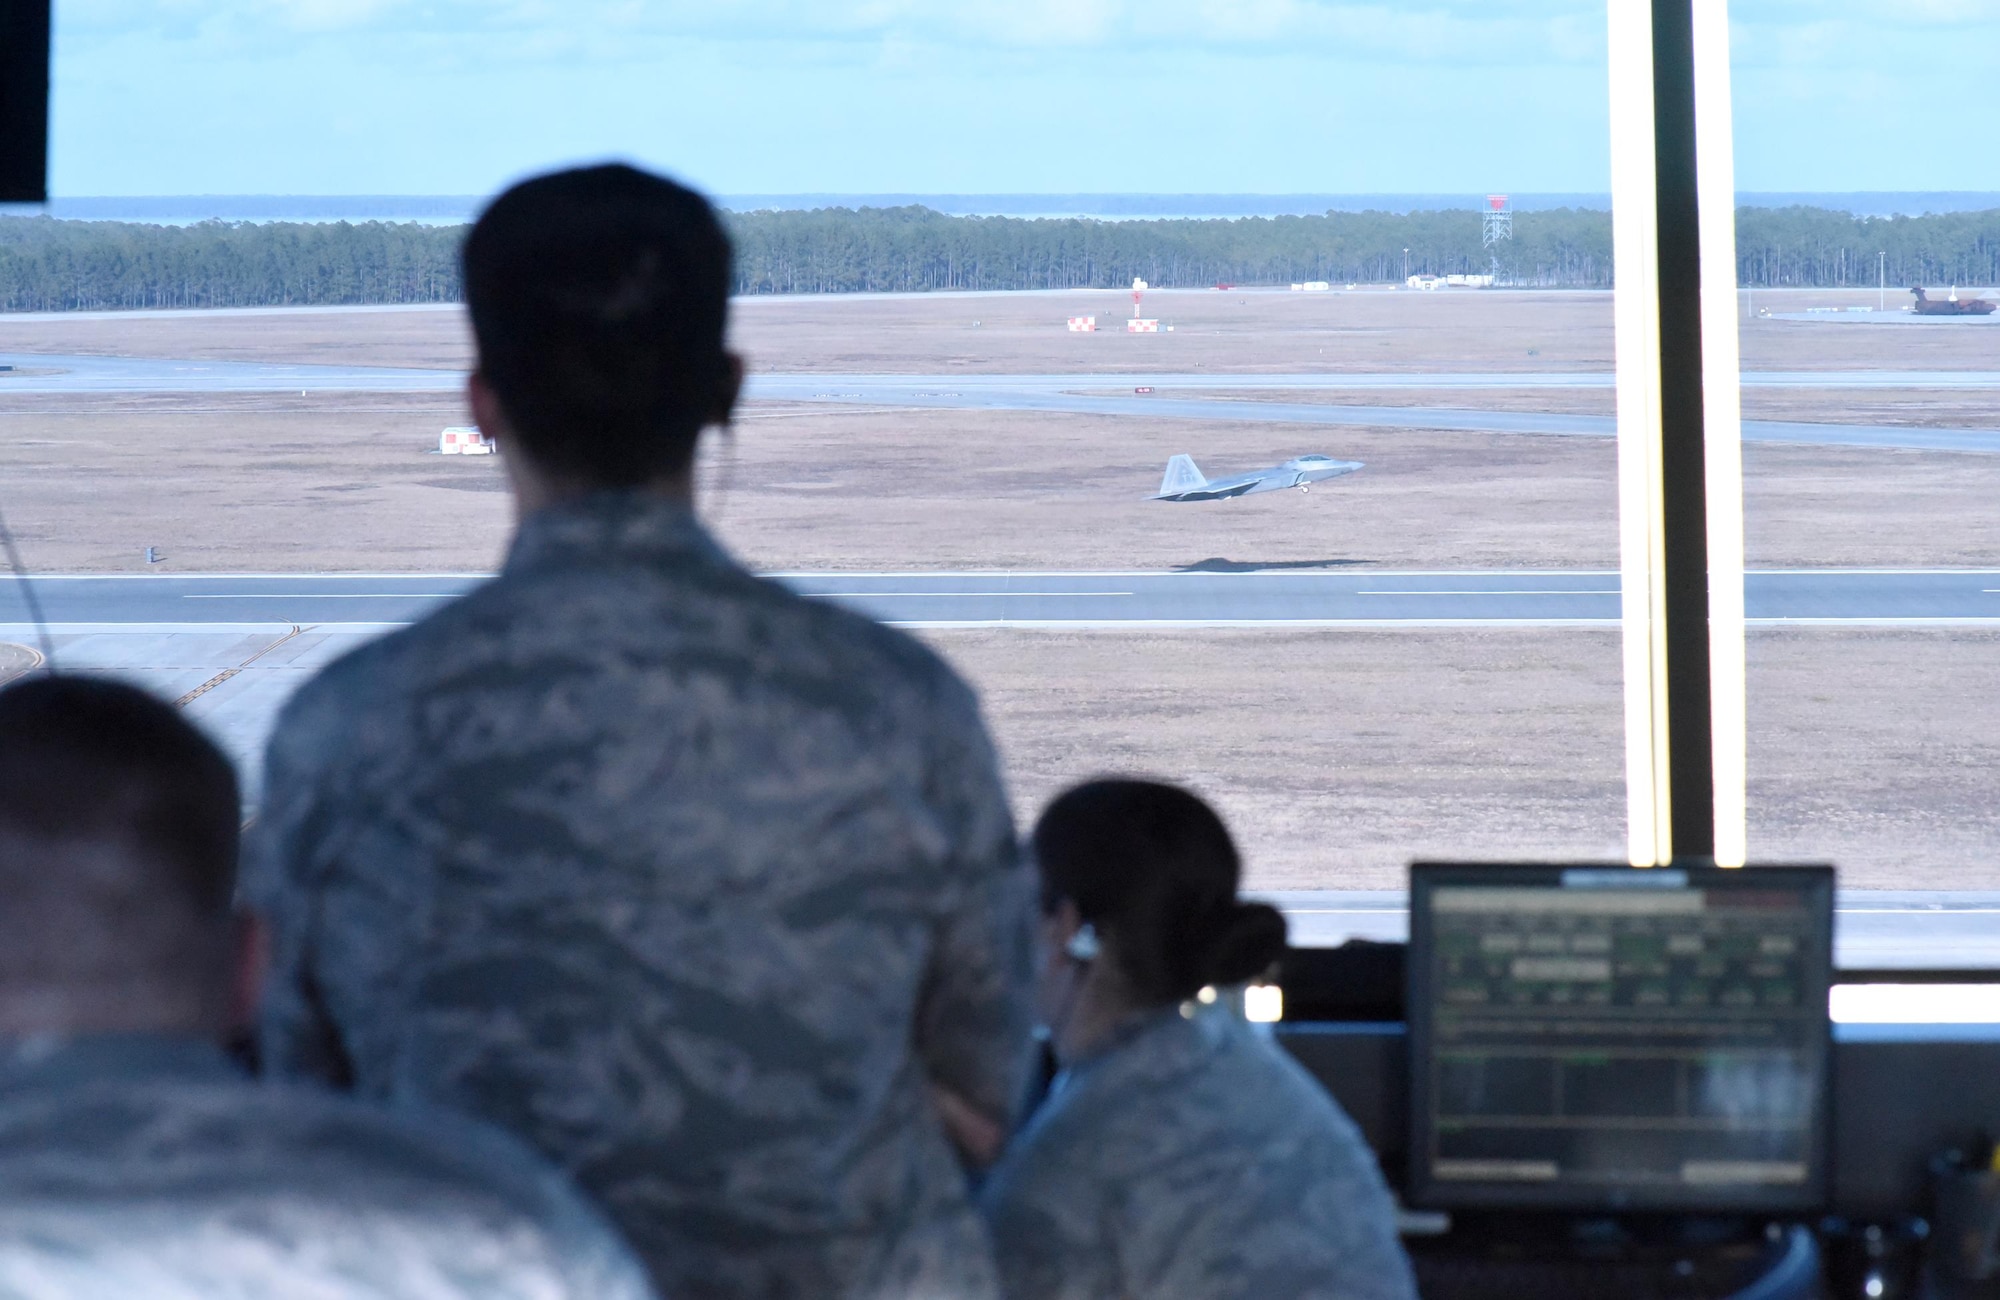 U.S. Air Force air traffic controllers from the 325th Operations Support Squadron at Tyndall Air Force Base, Fla., track an F-22 Raptor as it takes off on the Tyndall AFB flightline during Checkered Flag 17-1 Dec. 12, 2016. Tyndall’s air traffic controllers were responsible for an additional 40 aircraft during concurrent exercises Checkered Flag 17-1 and Combat Archer 17-3. (U.S. Air Force photo by Senior Airman Solomon Cook/Released)